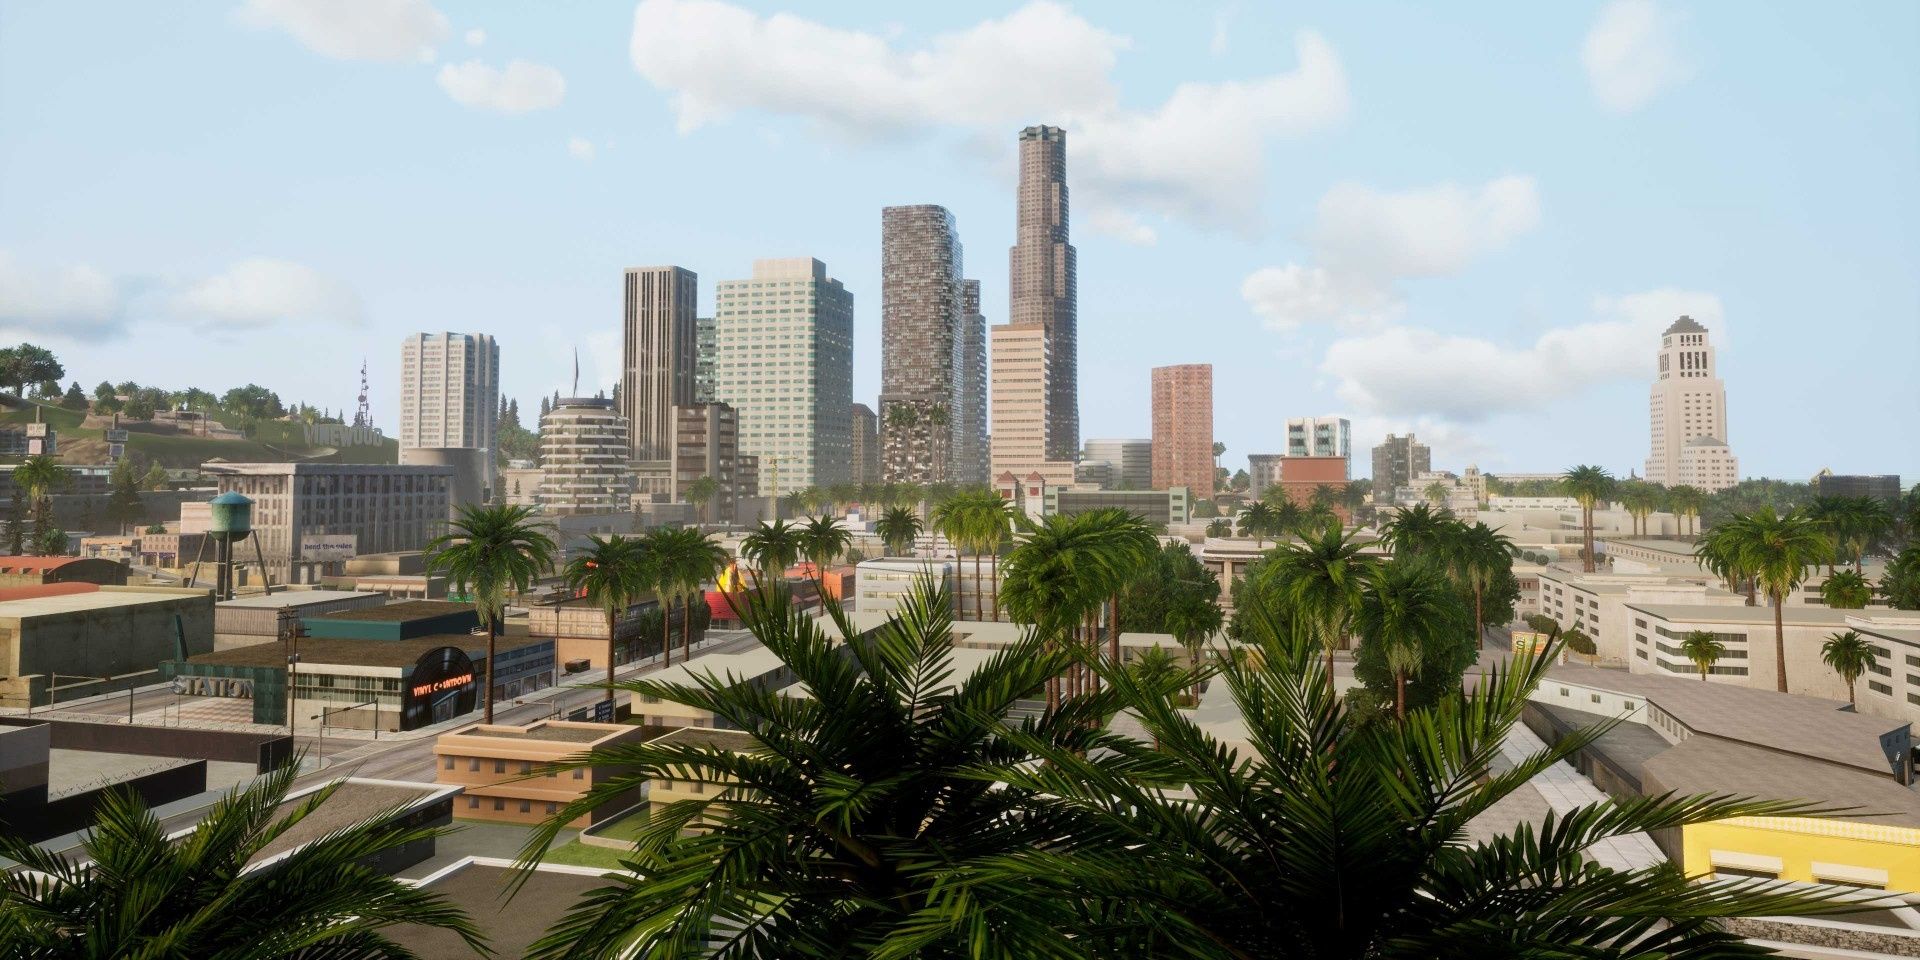 A screenshot showing Los Santos in Grand Theft Auto: San Andreas - The Definitive Edition